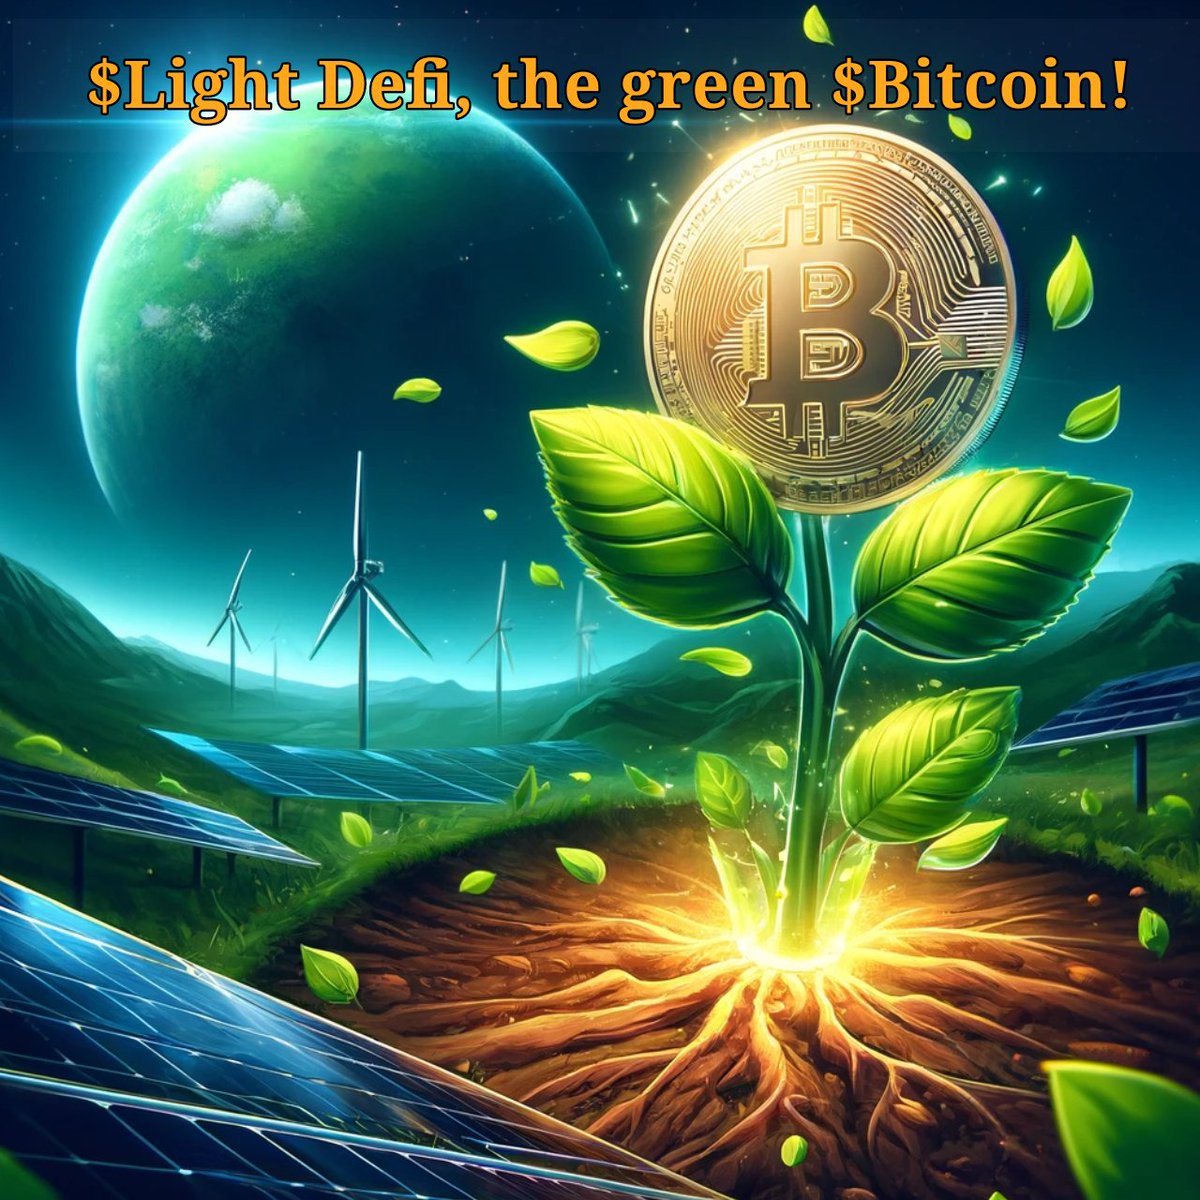 💪☀️🚀As the world turns towards greener solutions, $Light DeFi is already ahead with UFV 01, transforming sunlight into clean, affordable energy.

 Join us to shape the future of energy! For Tio Paulo WhatsApp! 
#FutureOfEnergy #Sustainable #Crypto #Dubai #criptomoedas #apagones